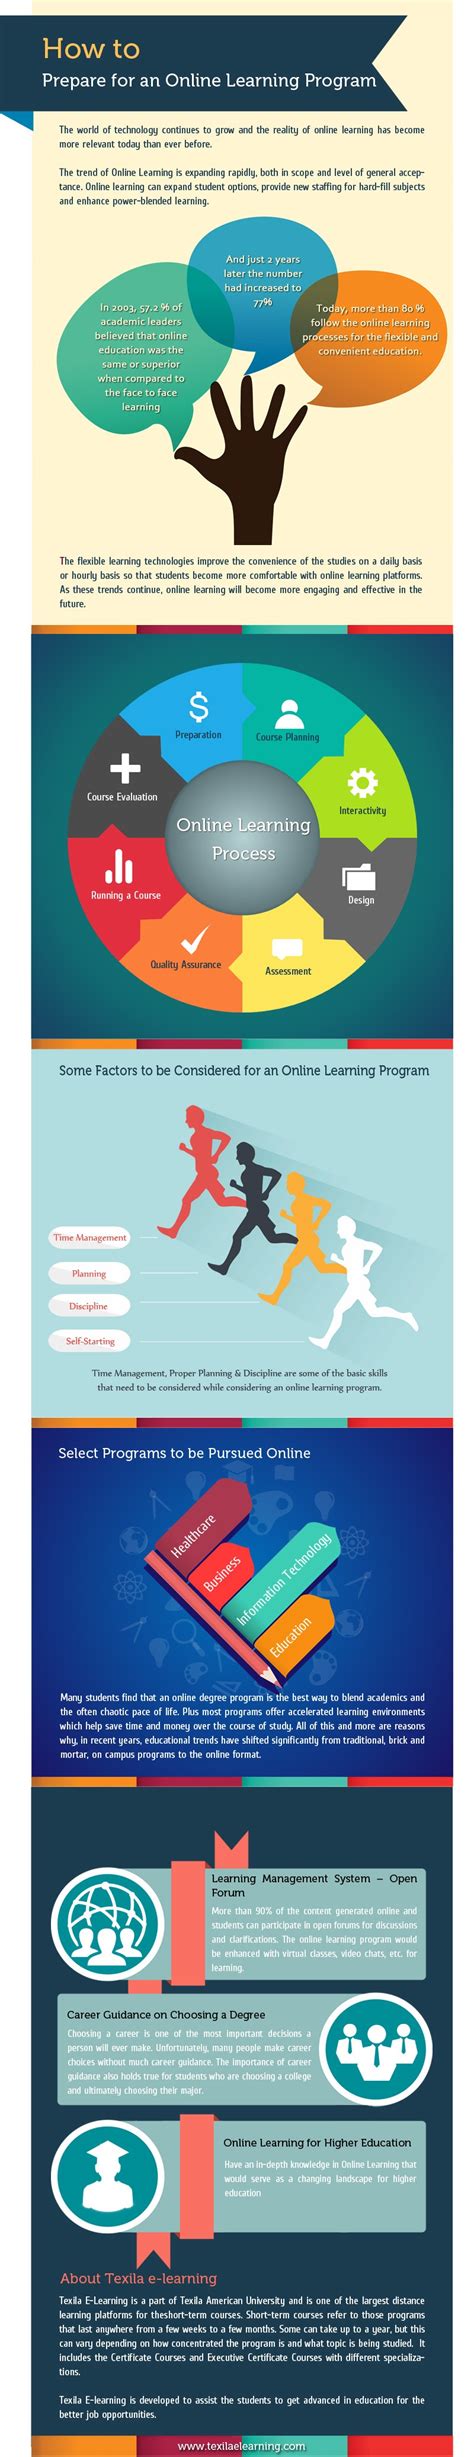 How To Prepare For An Online Learning Program Infographic E Learning